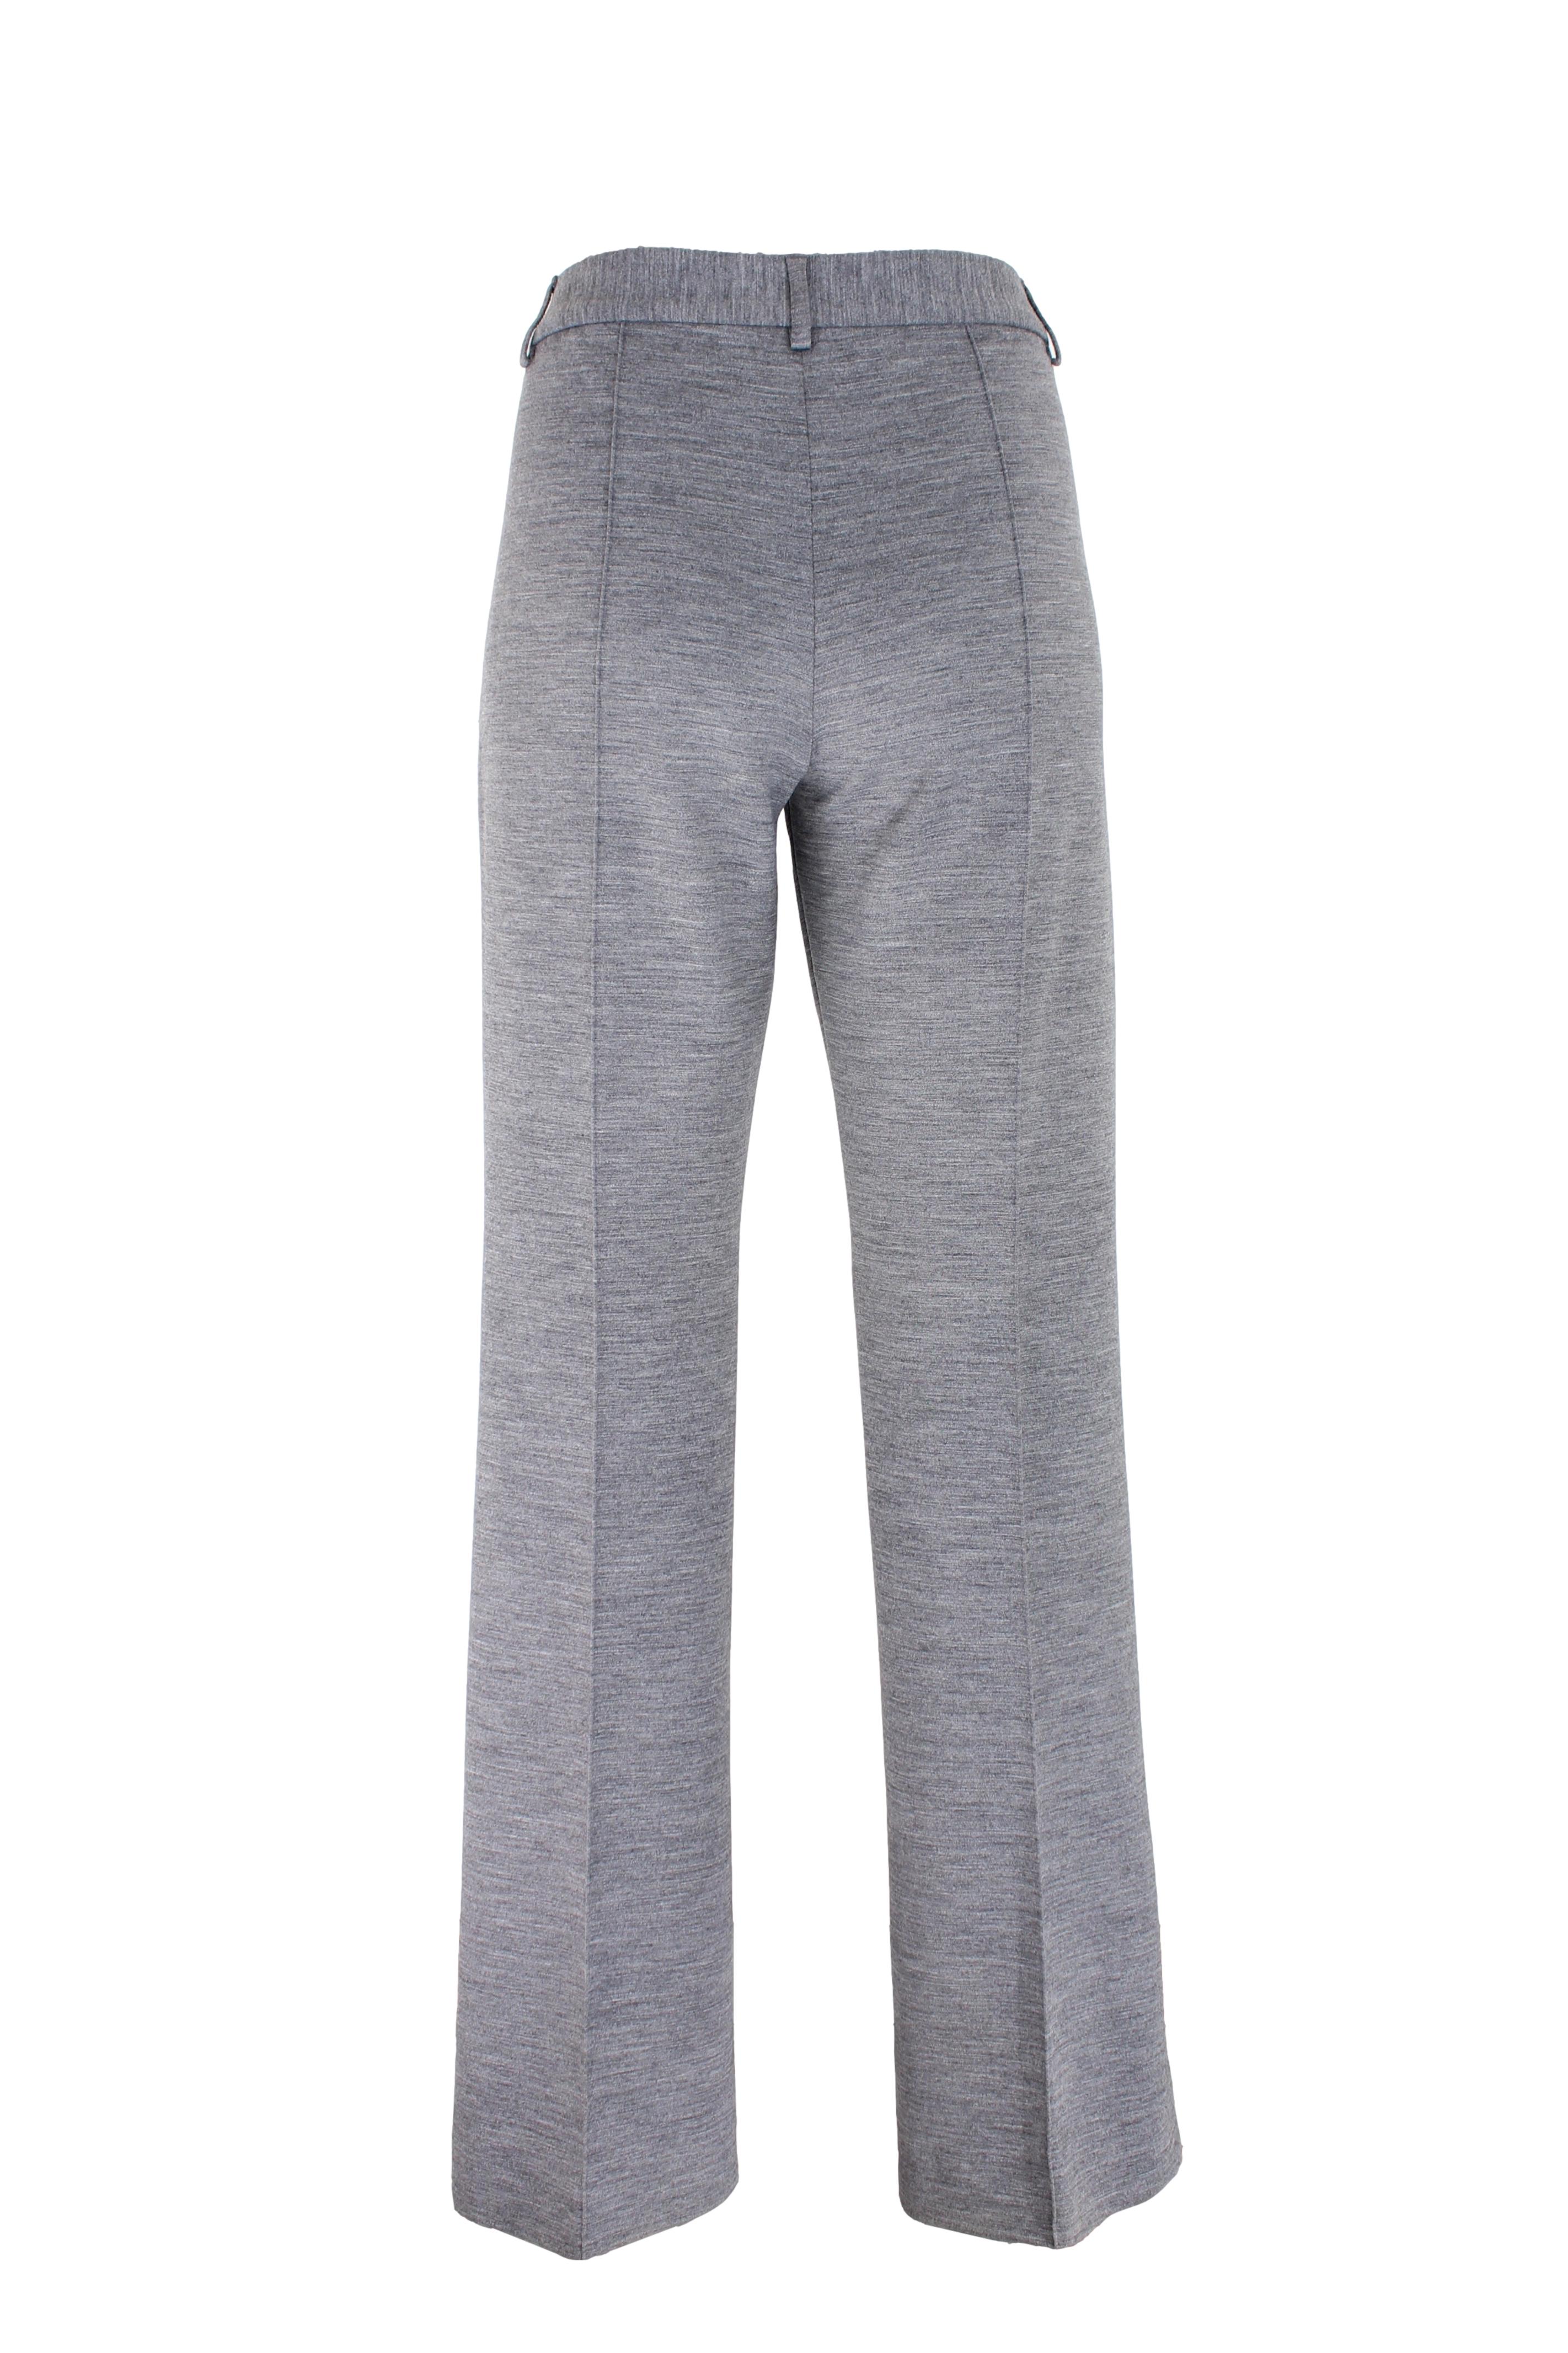 Moschino Cheap and Chic 2000s vintage women's trousers. Palazzo trousers, side pockets, zip and double button closure. Gray color, 52% polyester, 43% virgin wool fabric. Made in Italy.

Condition: Excellent

Item used few times, it remains in its